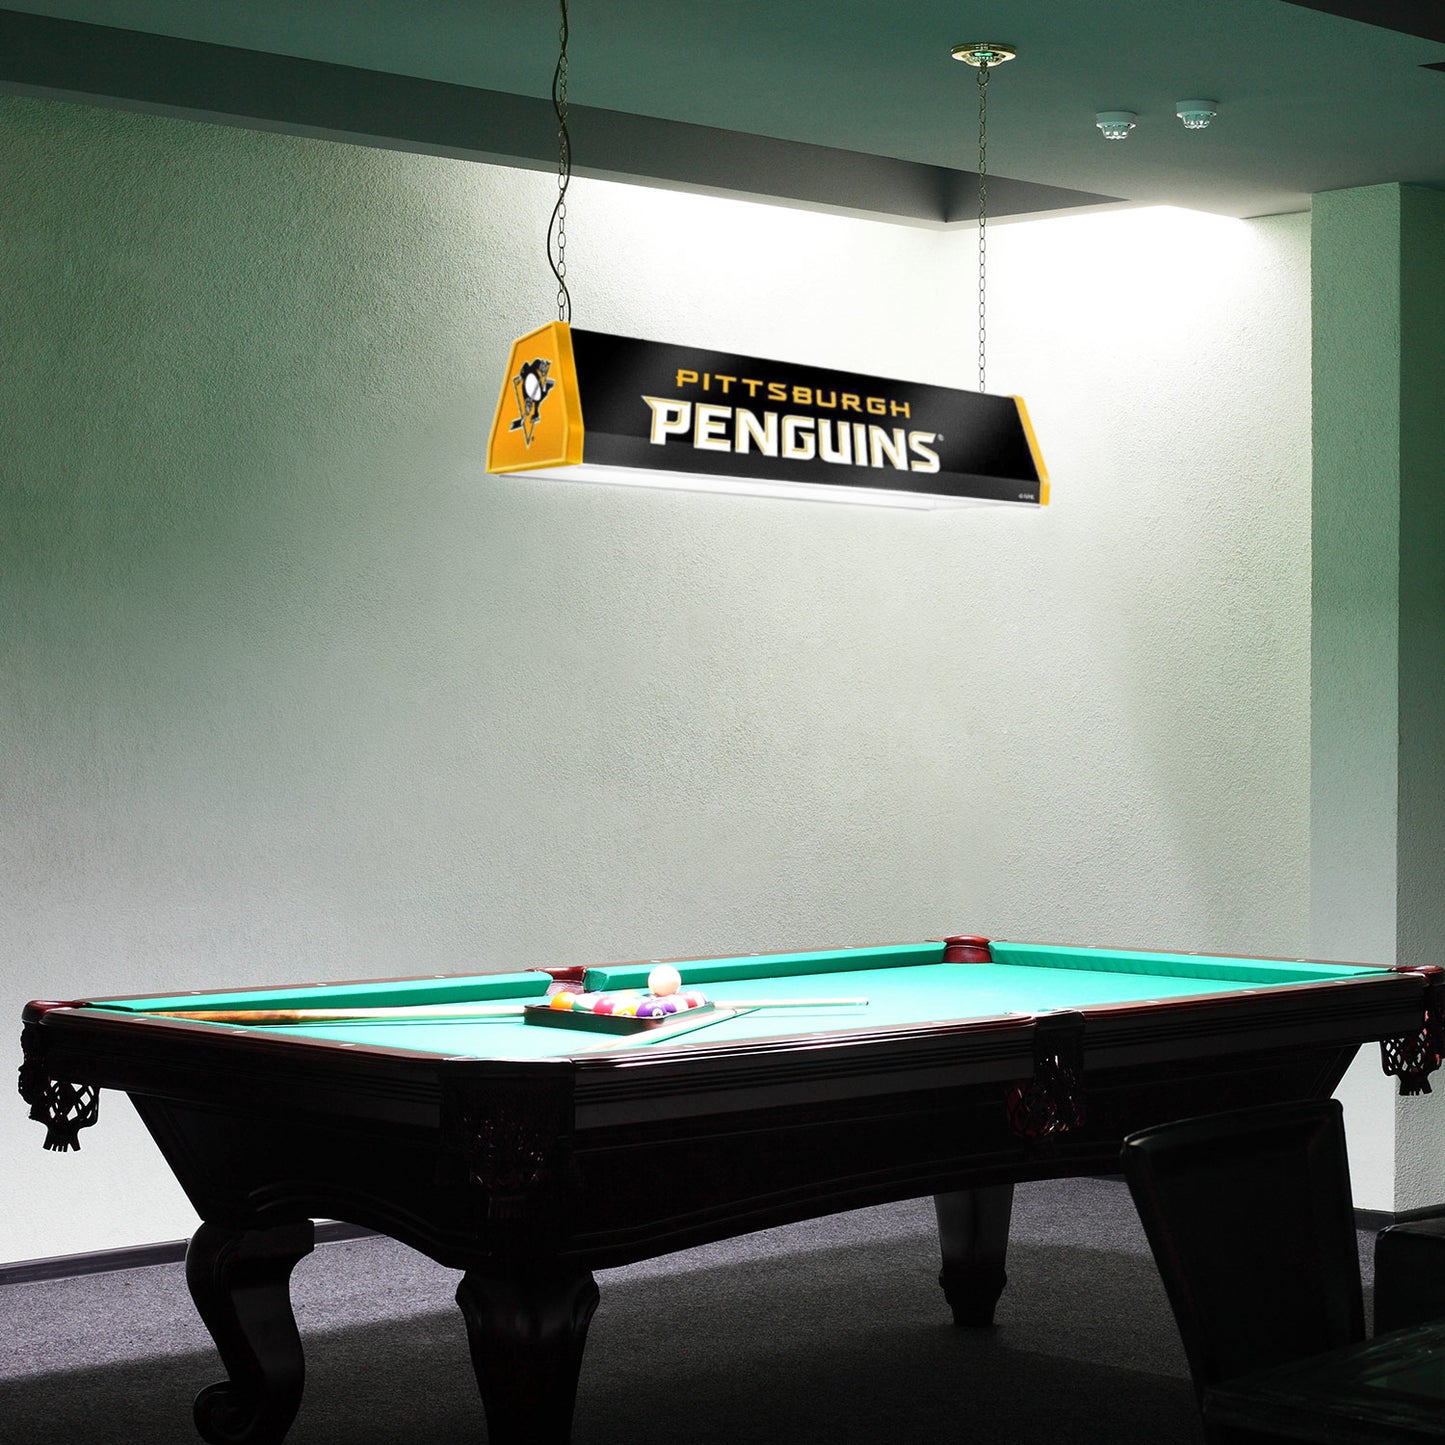 Pittsburgh Penguins Standard Pool Table Light Room View